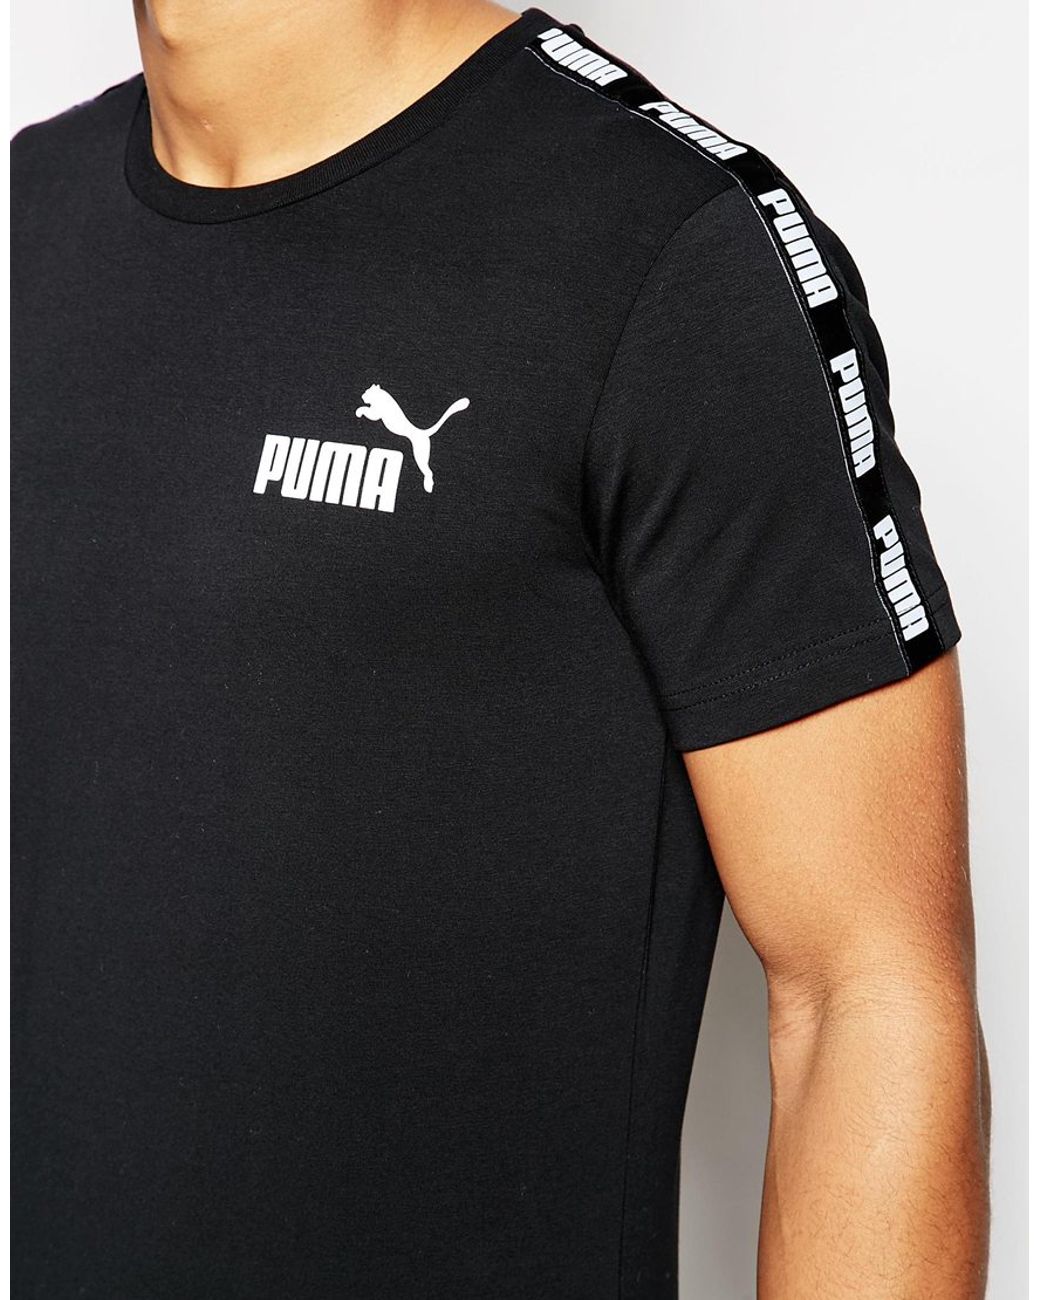 PUMA T-shirt With Taping in Black for Men | Lyst